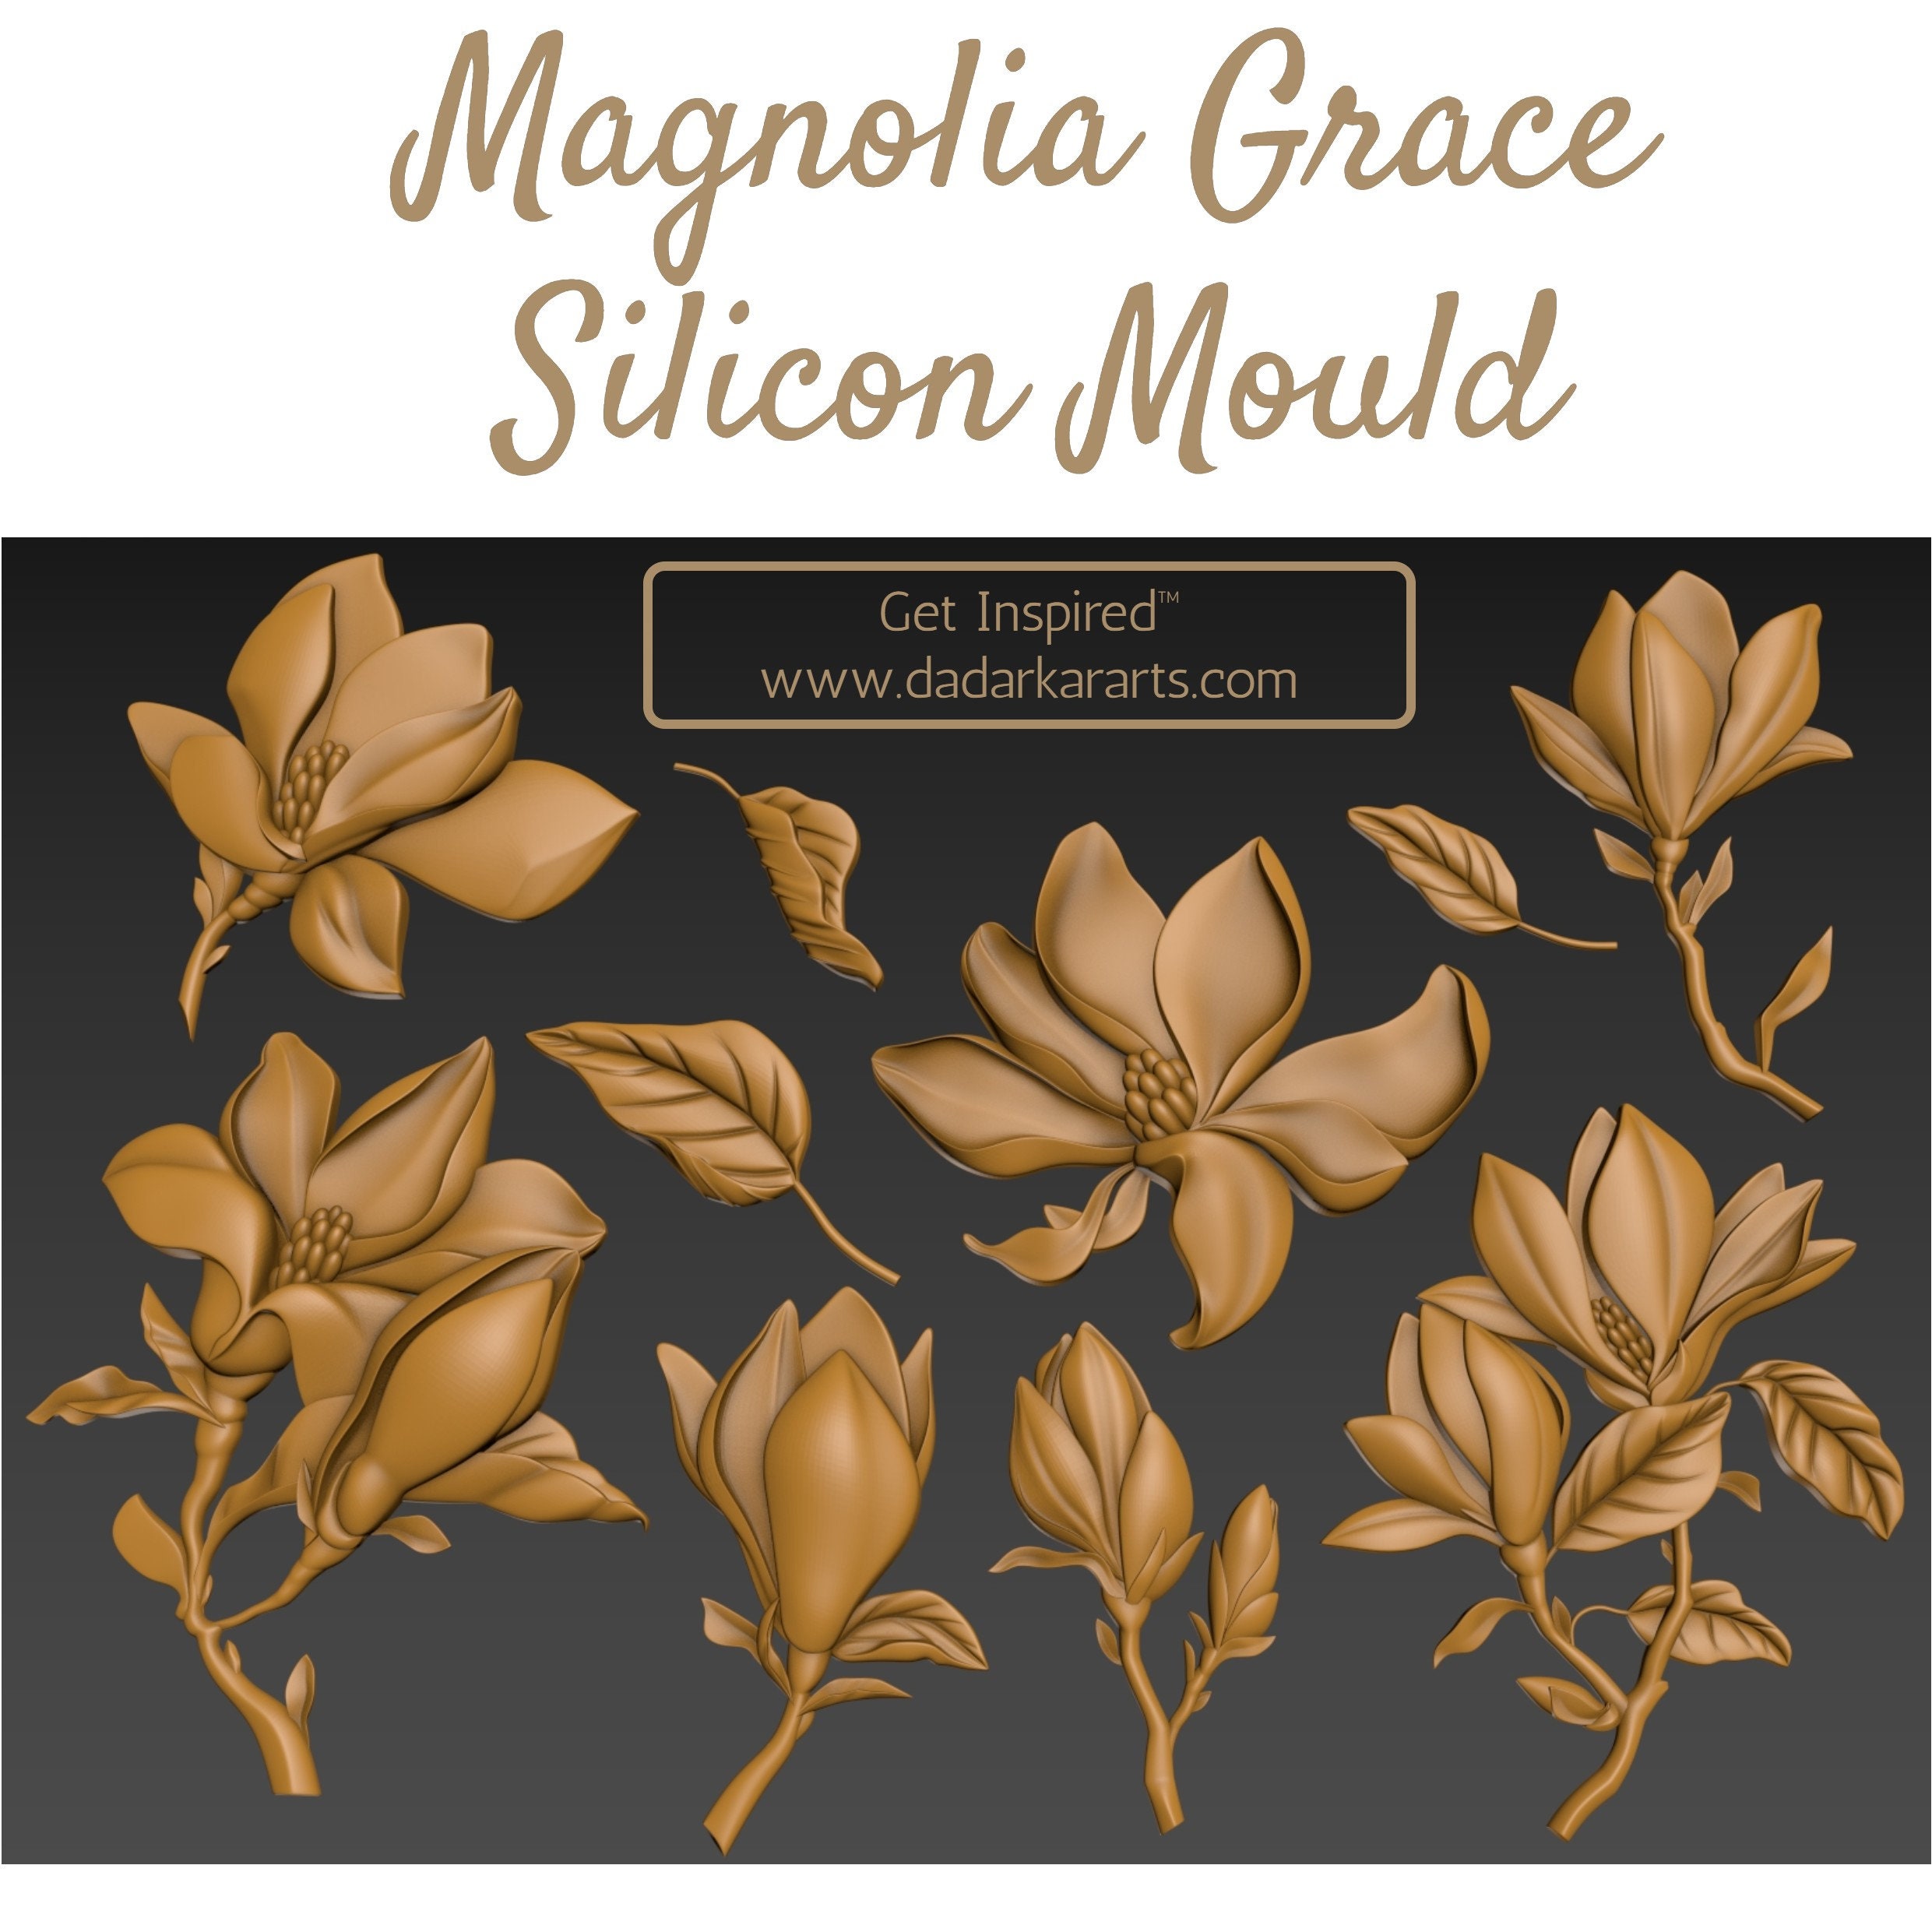 Magnolia Grace - Silicone Mould - Get Inspired!